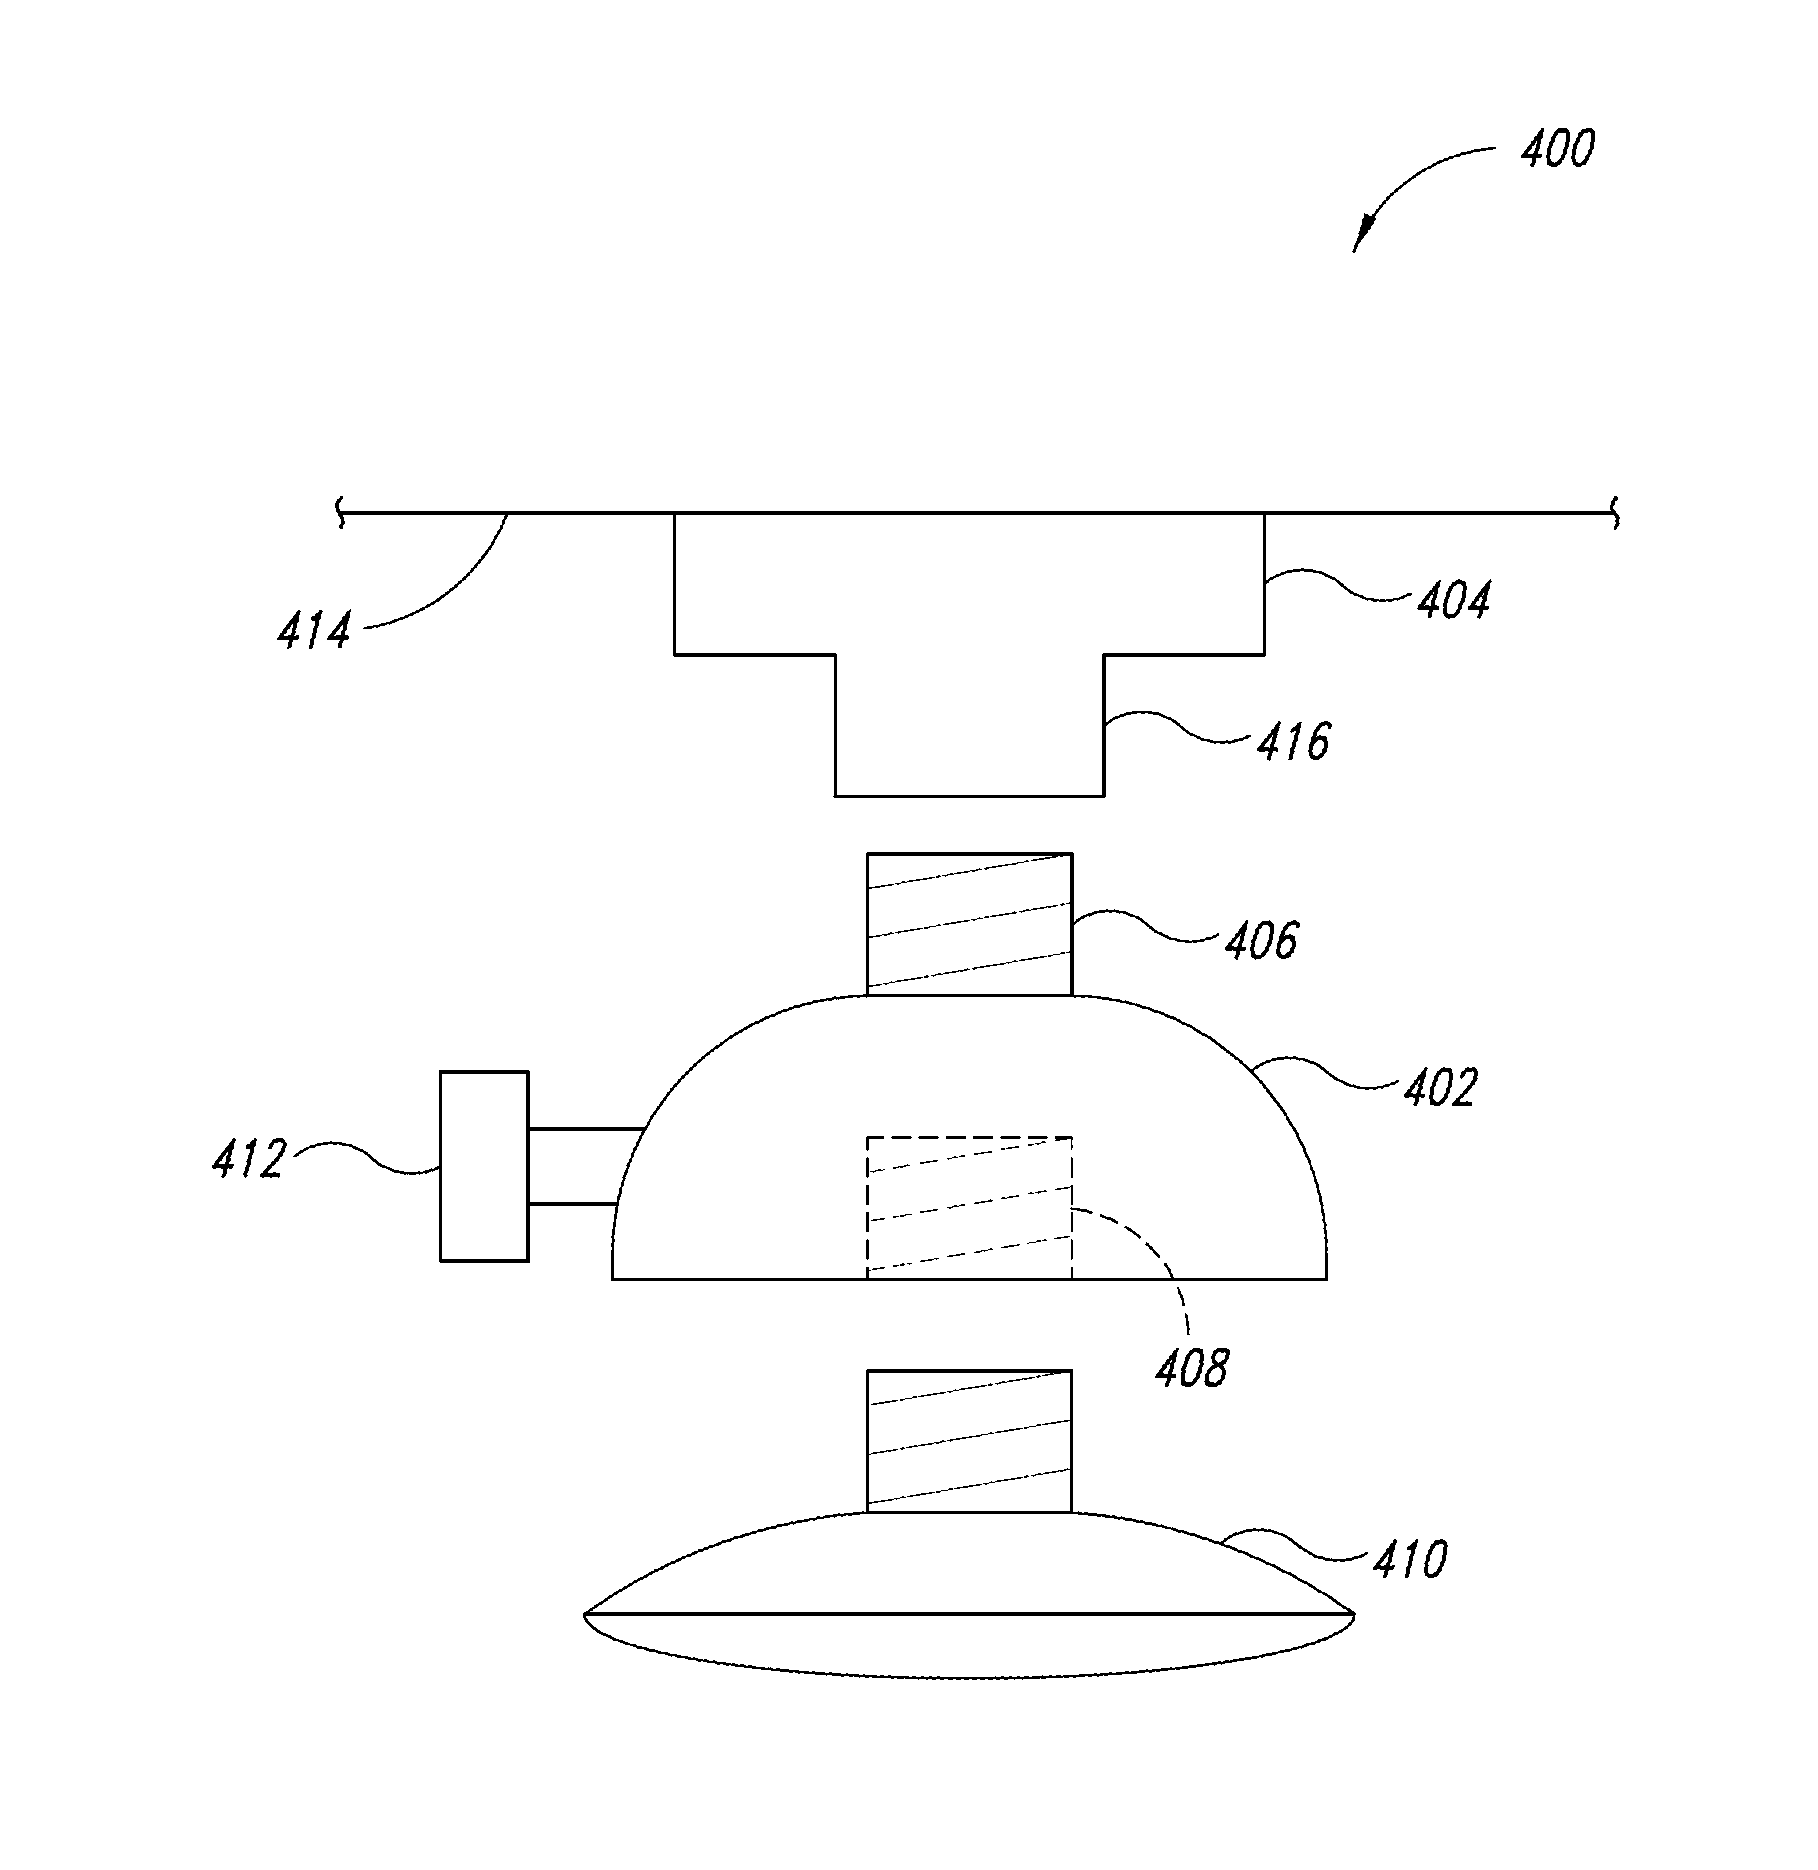 Adjustable output solid-state lighting device